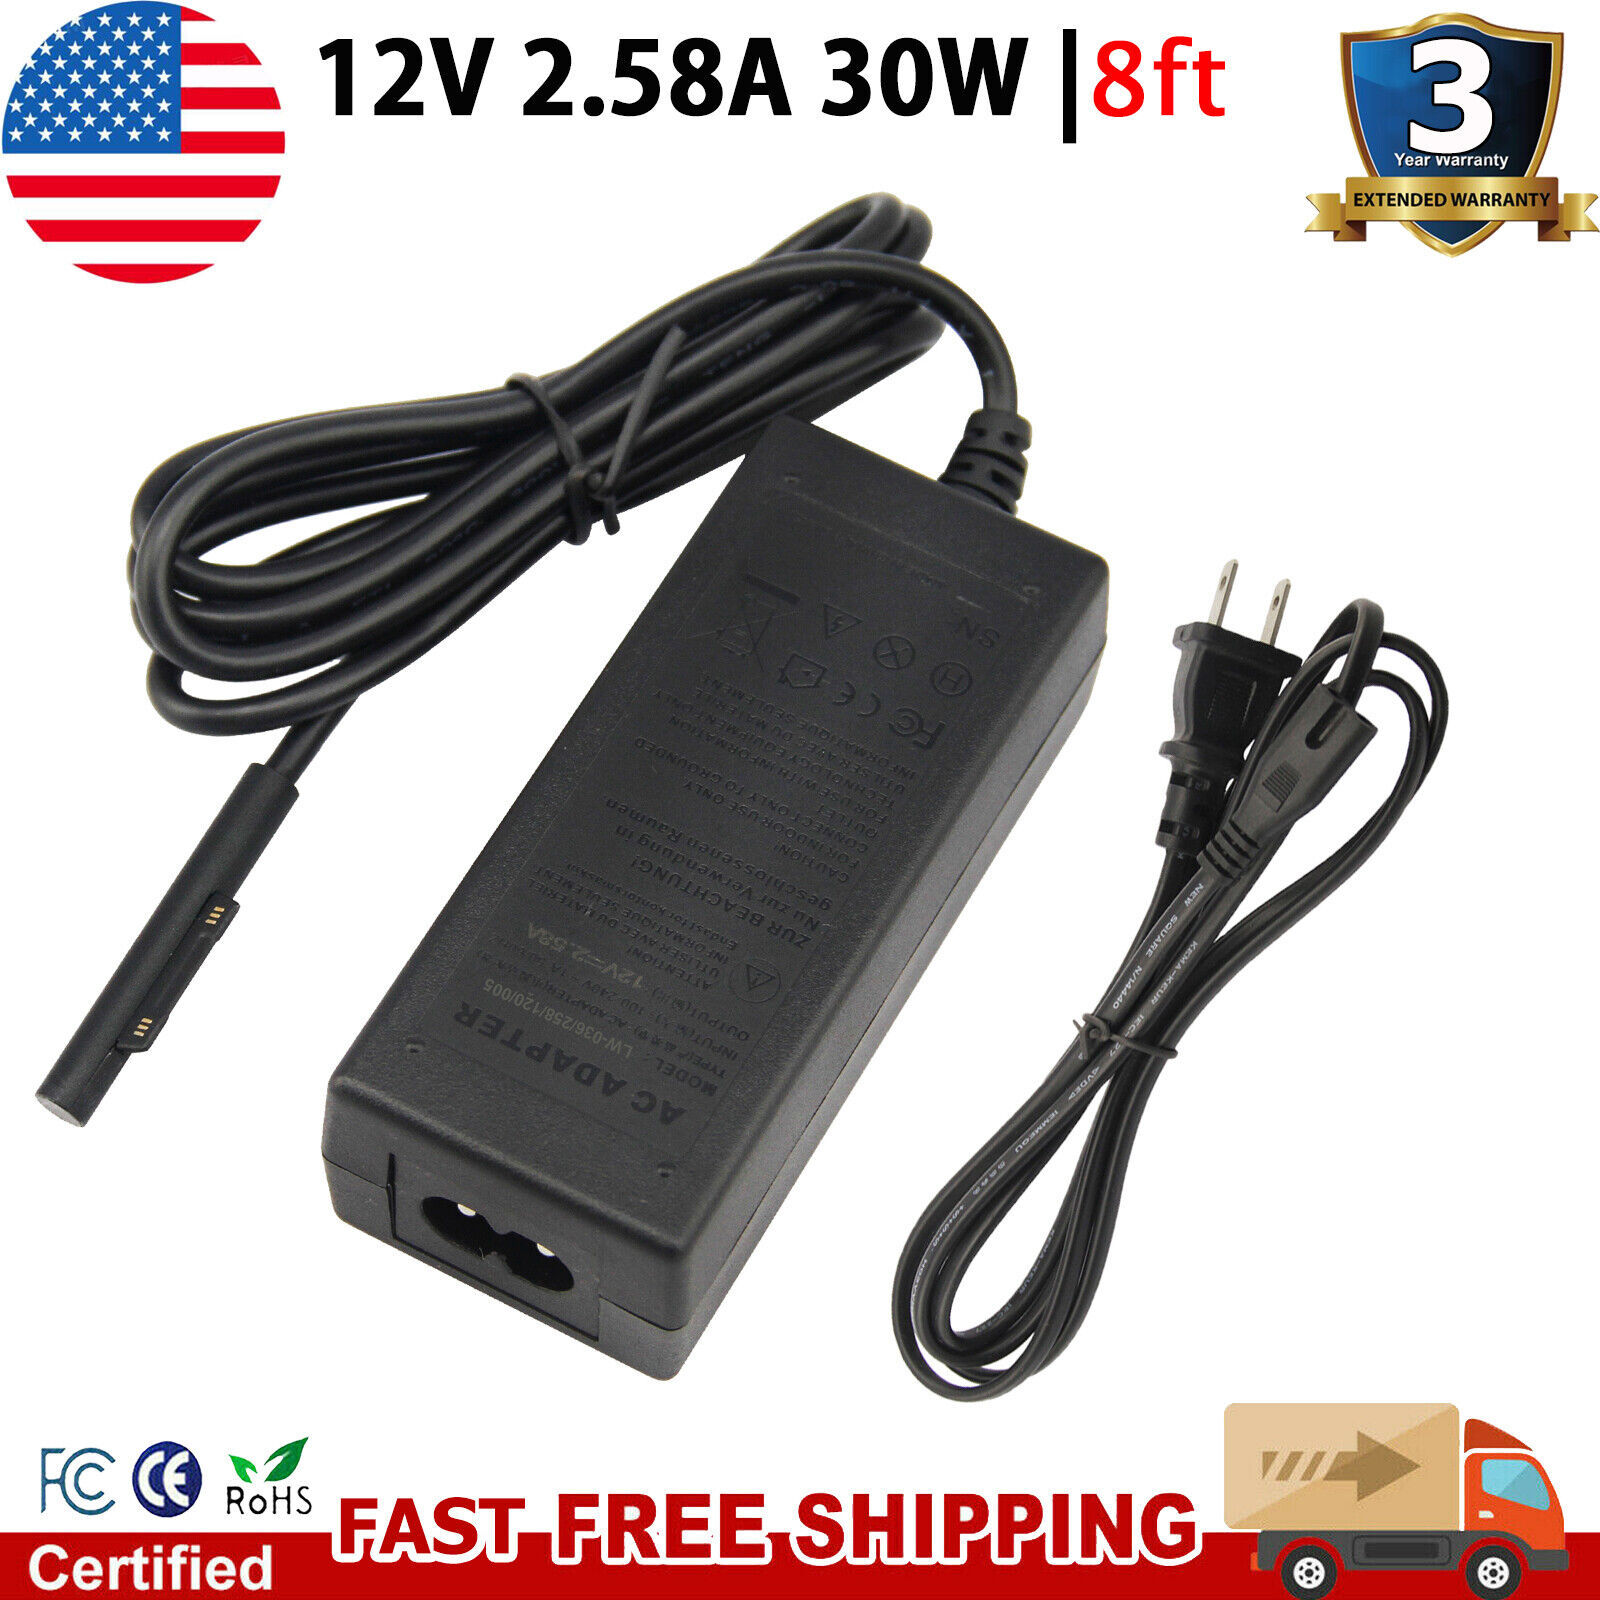 Primary image for Ac Adapter Charger 12V 2.58A For Microsoft Surface Pro4 Pro3 Model 1625